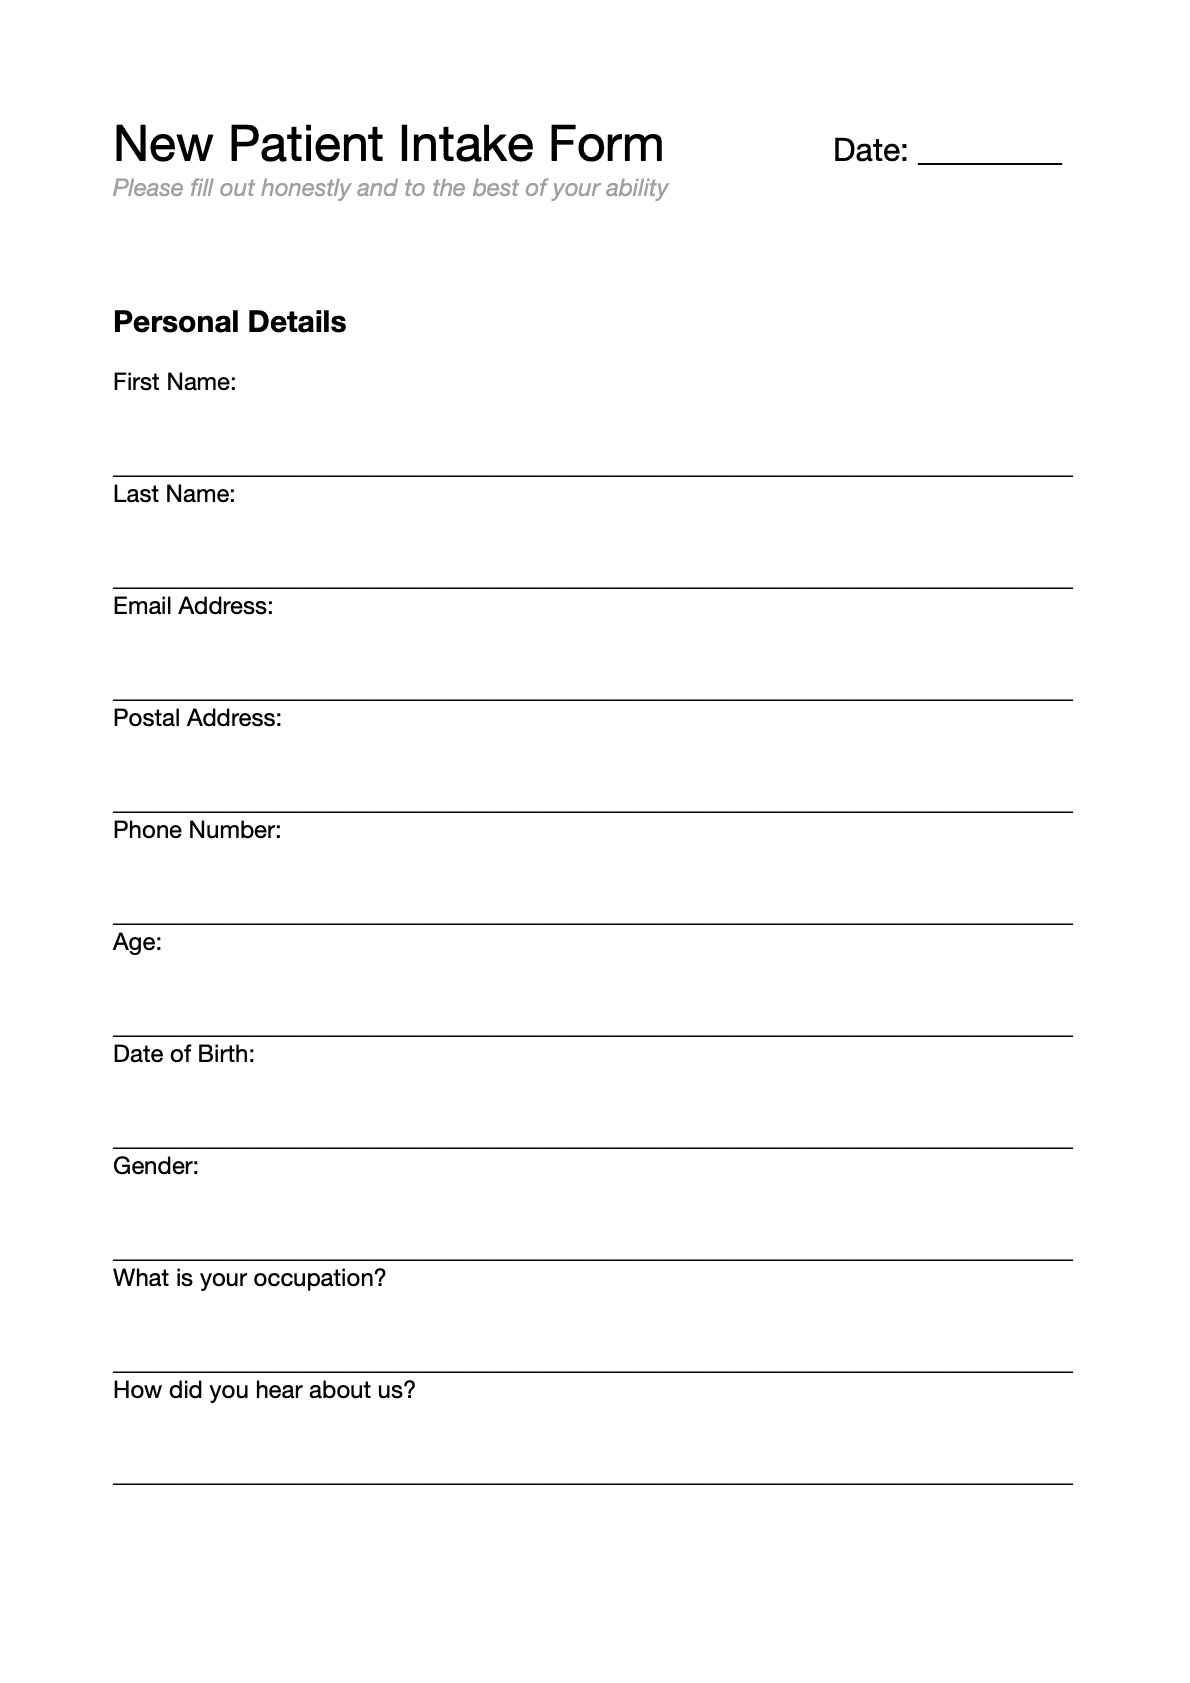 New Patient Intake Forms Printable 5808